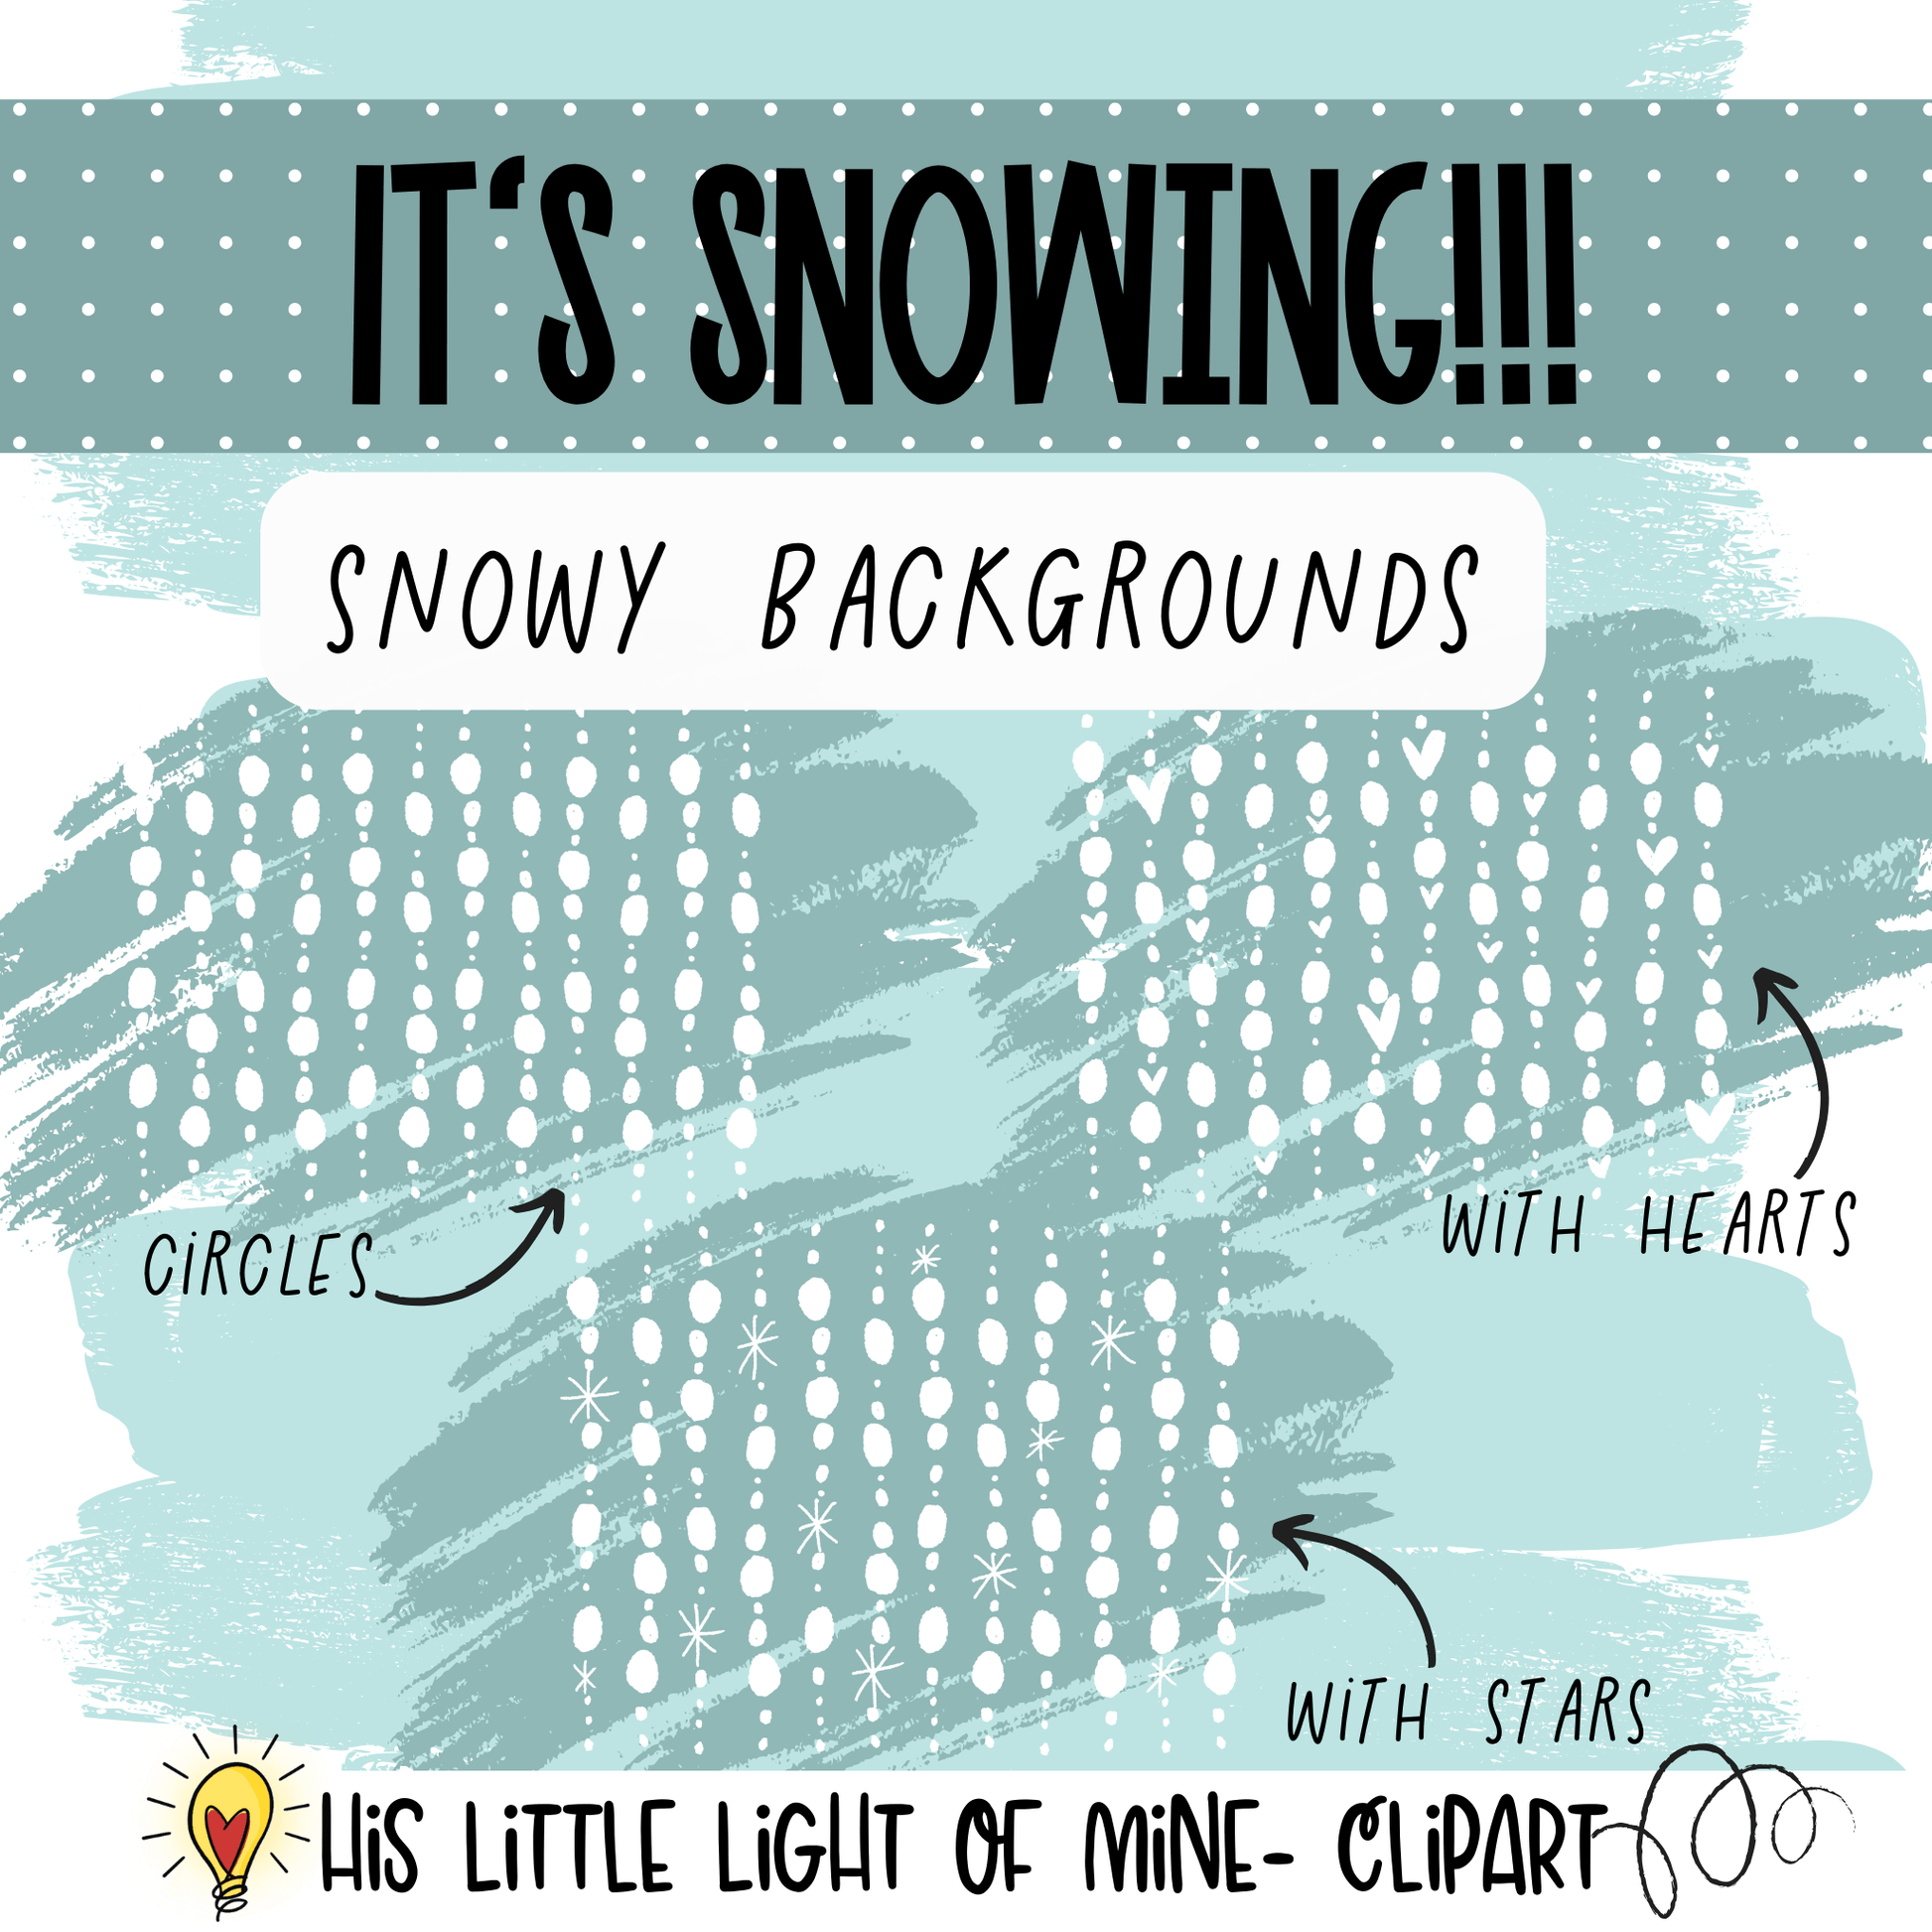 It’s Snowing clip art pack showing snowy snowing backgrounds with hearts, stars and circles